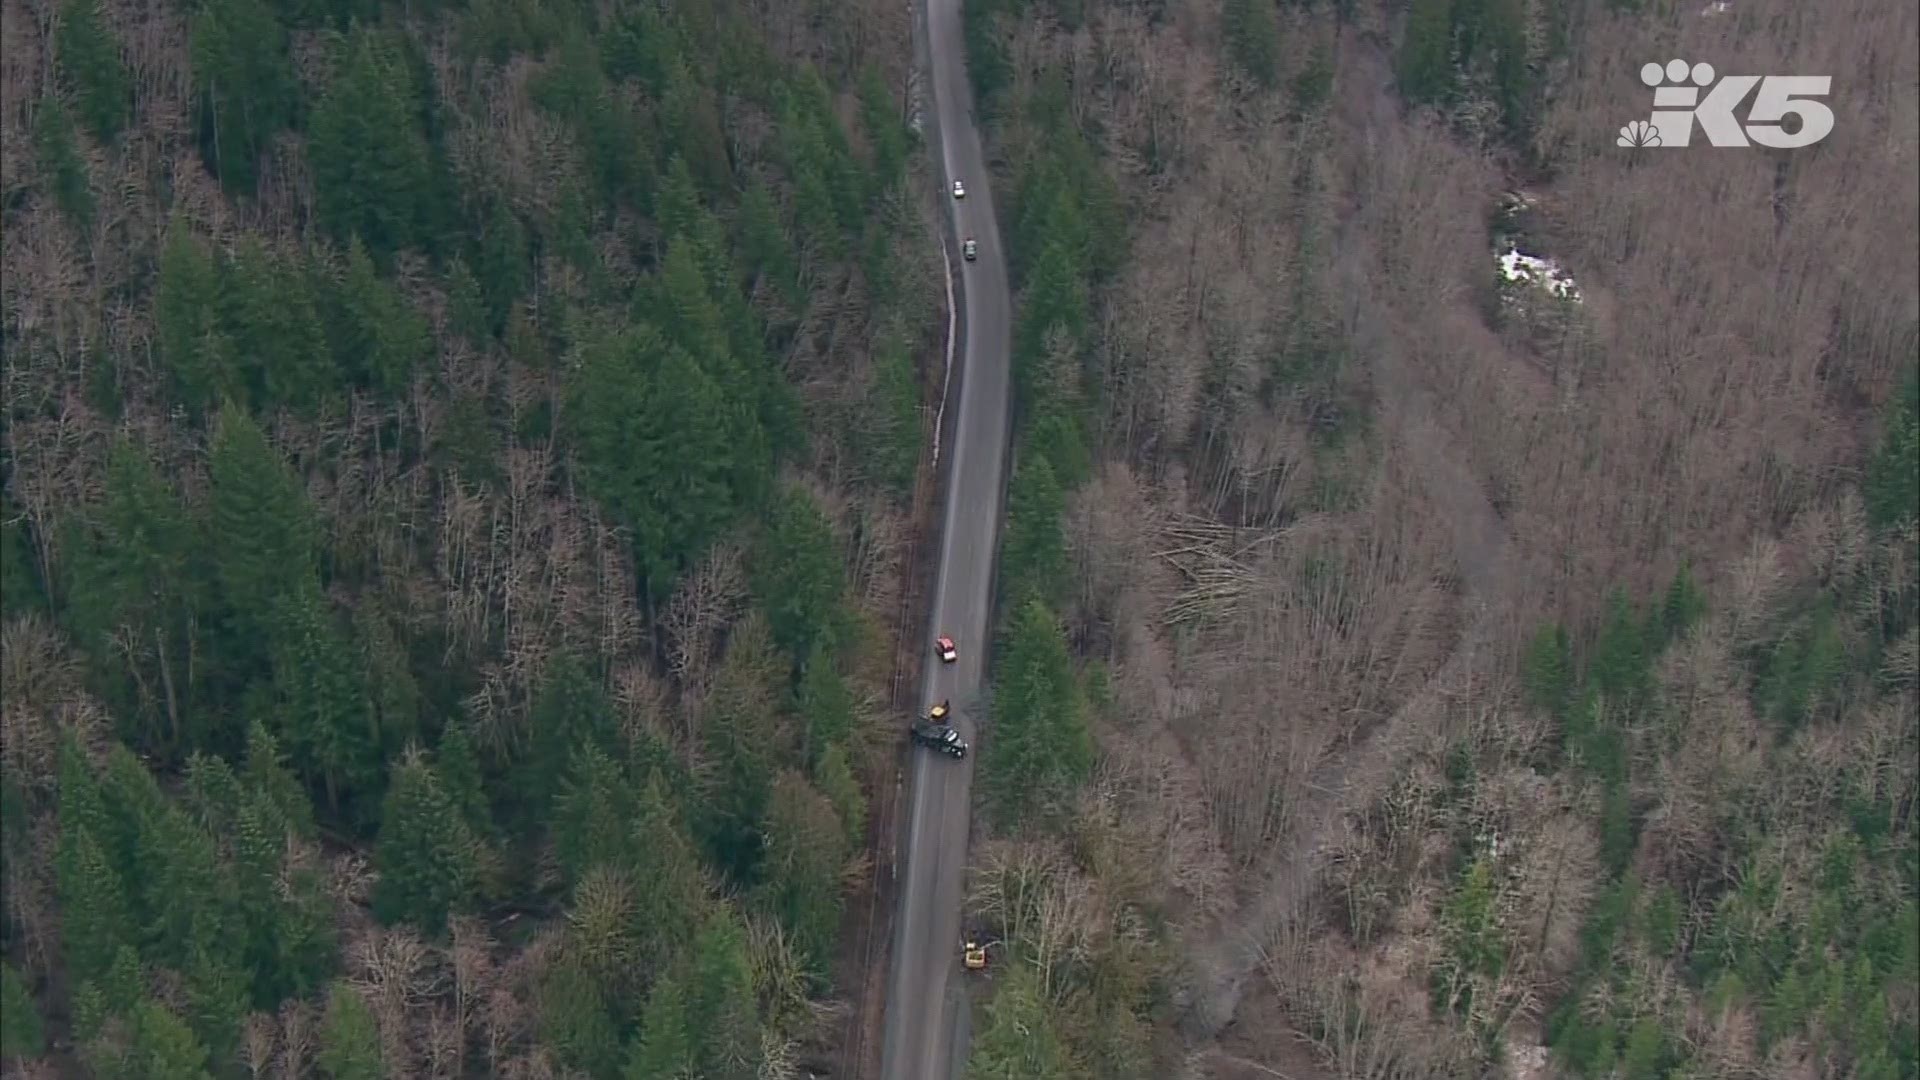 SR 706 re-opened several weeks ahead of schedule after two “significant” mudslides forced WSDOT to close the roadway.